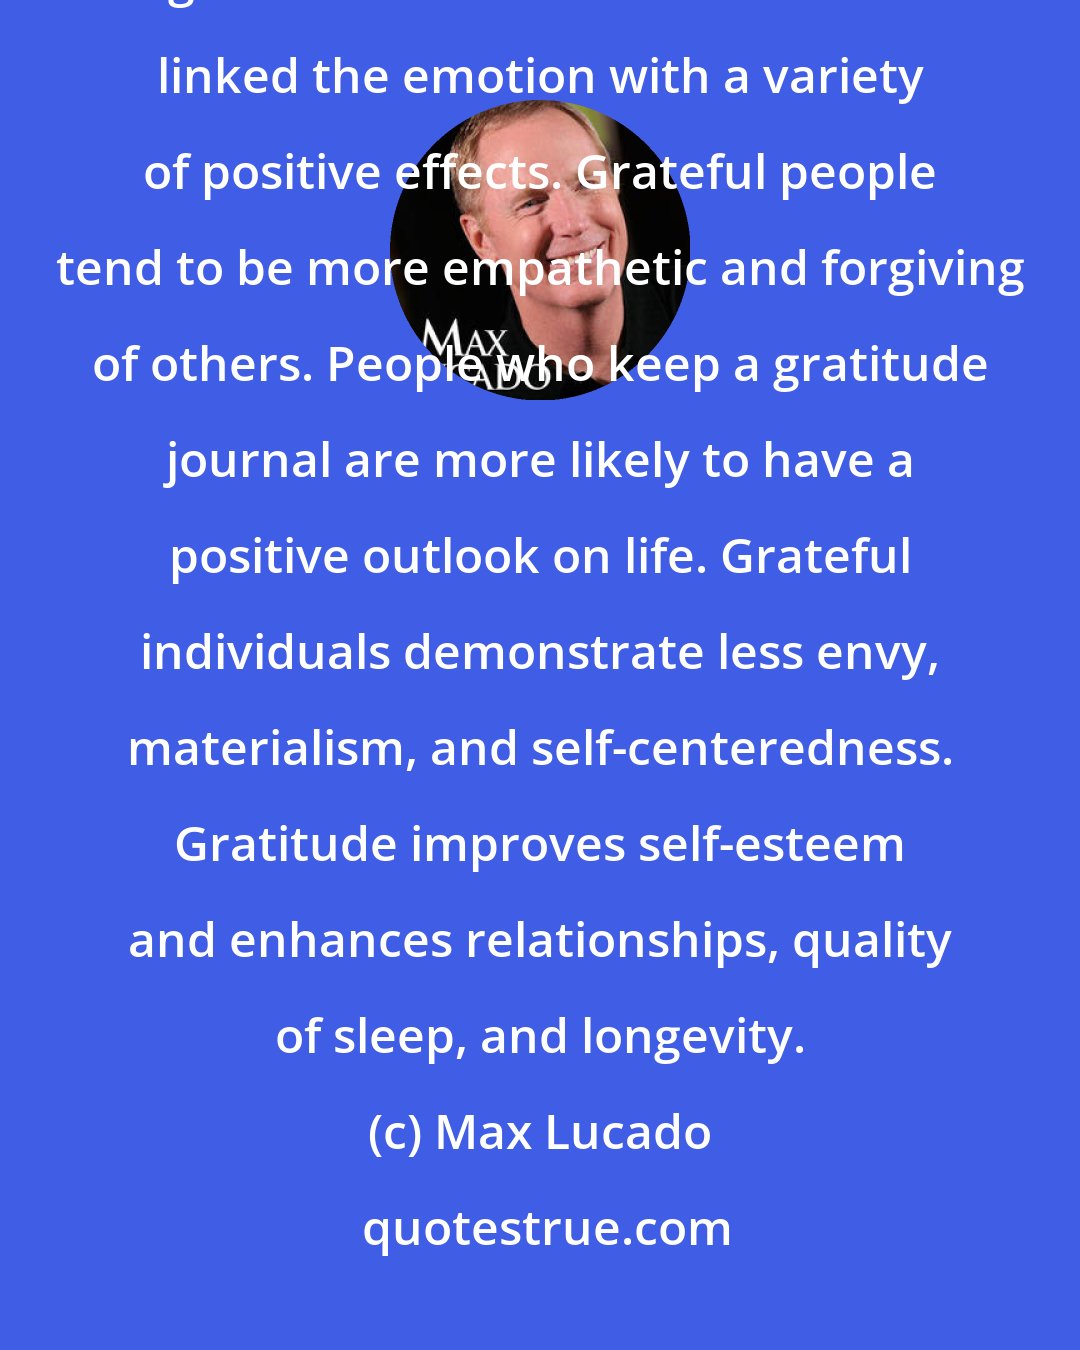 Max Lucado: Gratitude is a mindful awareness of the benefits of life. It's the greatest of virtues. Studies have linked the emotion with a variety of positive effects. Grateful people tend to be more empathetic and forgiving of others. People who keep a gratitude journal are more likely to have a positive outlook on life. Grateful individuals demonstrate less envy, materialism, and self-centeredness. Gratitude improves self-esteem and enhances relationships, quality of sleep, and longevity.